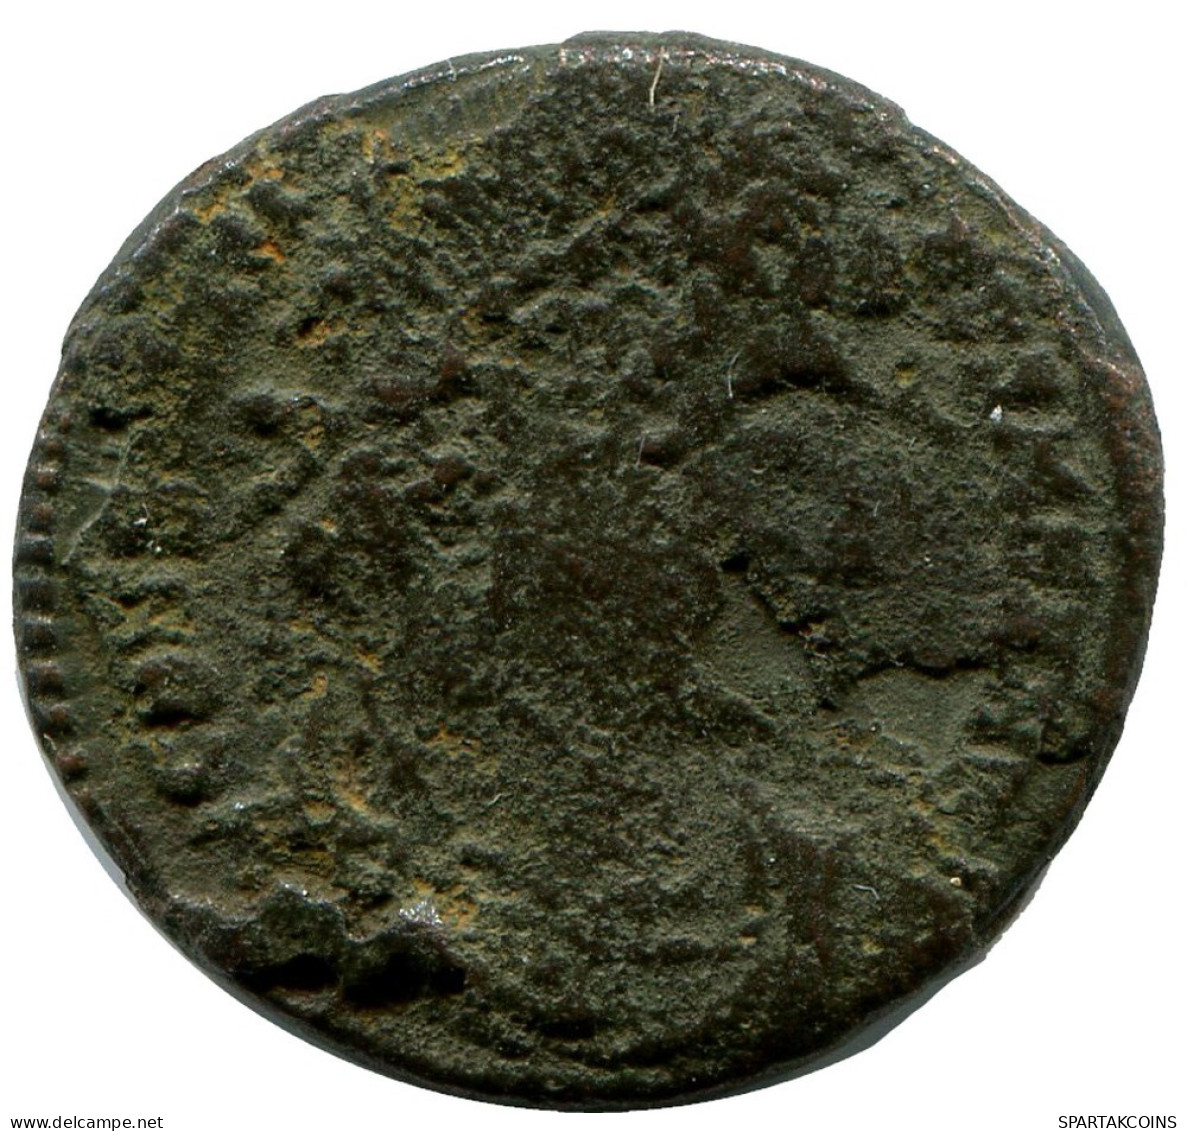 CONSTANTINE I MINTED IN NICOMEDIA FOUND IN IHNASYAH HOARD EGYPT #ANC10925.14.U.A - The Christian Empire (307 AD Tot 363 AD)